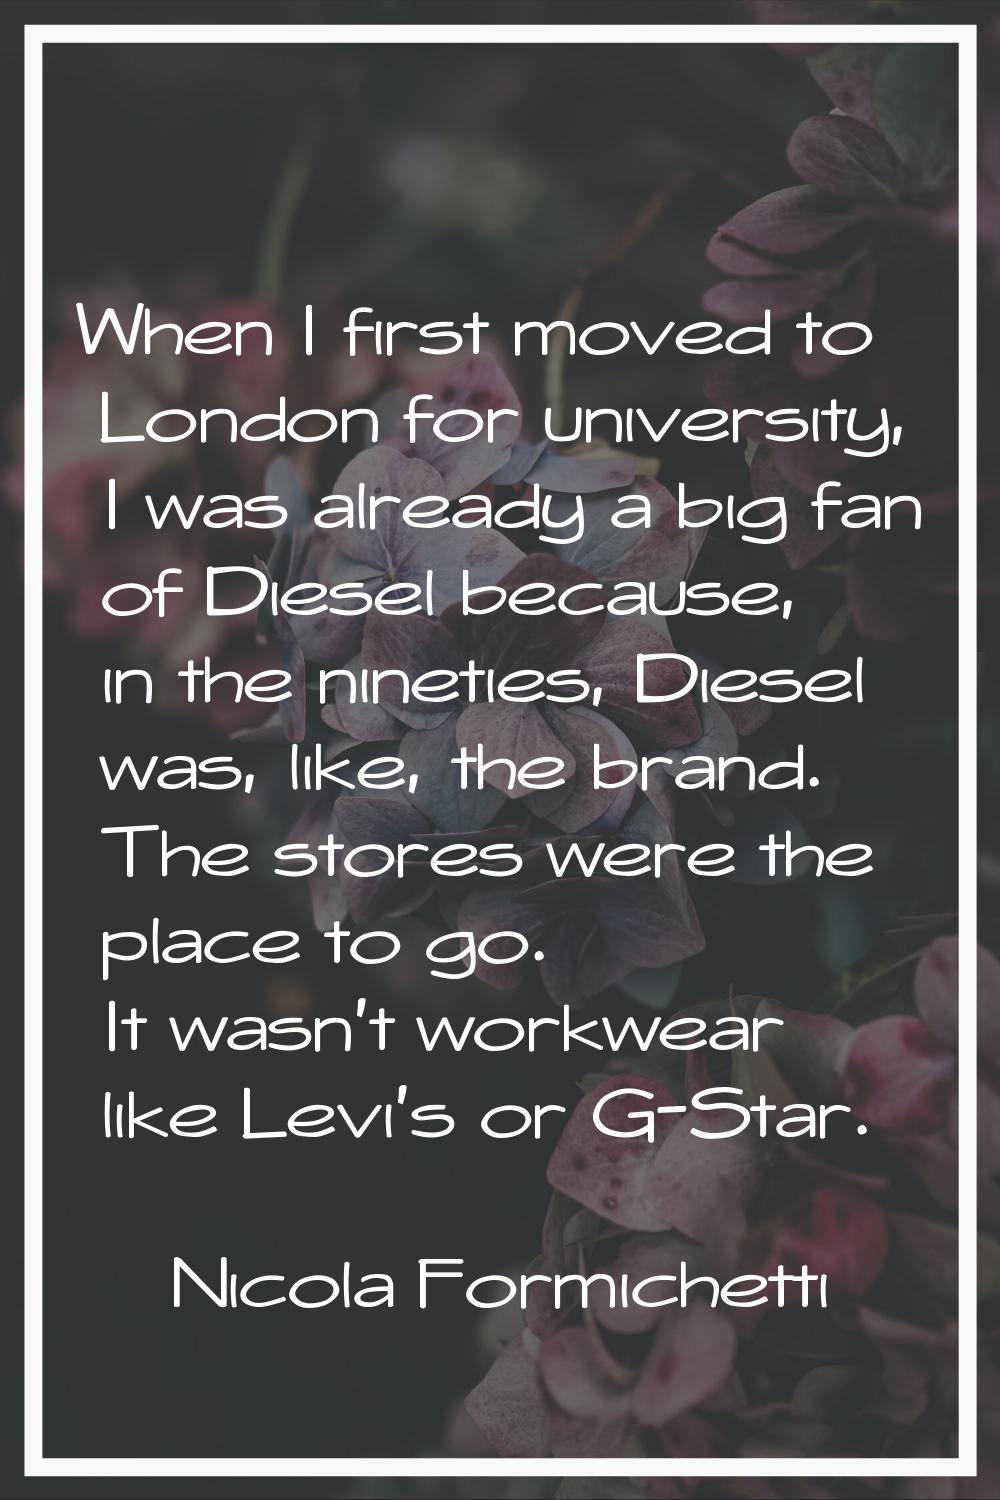 When I first moved to London for university, I was already a big fan of Diesel because, in the nine